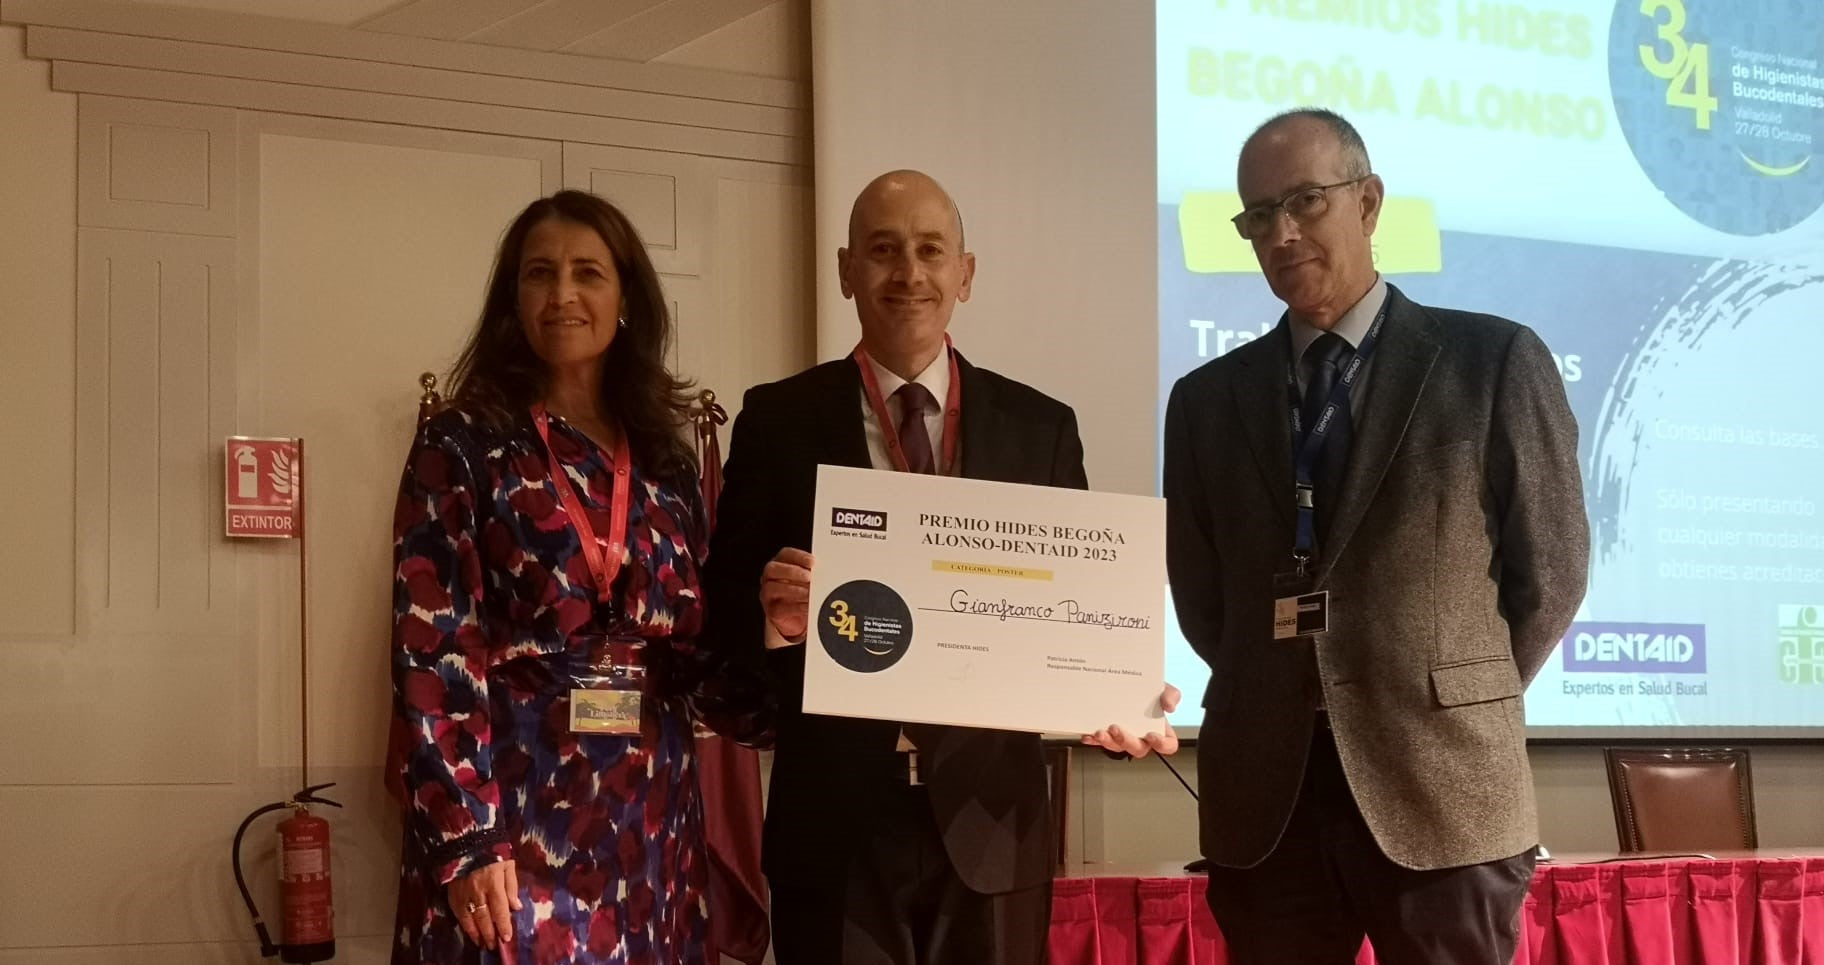 HIDES 34th National Congress in Spain Acknowledges Award-Winning Lumoral Study Poster